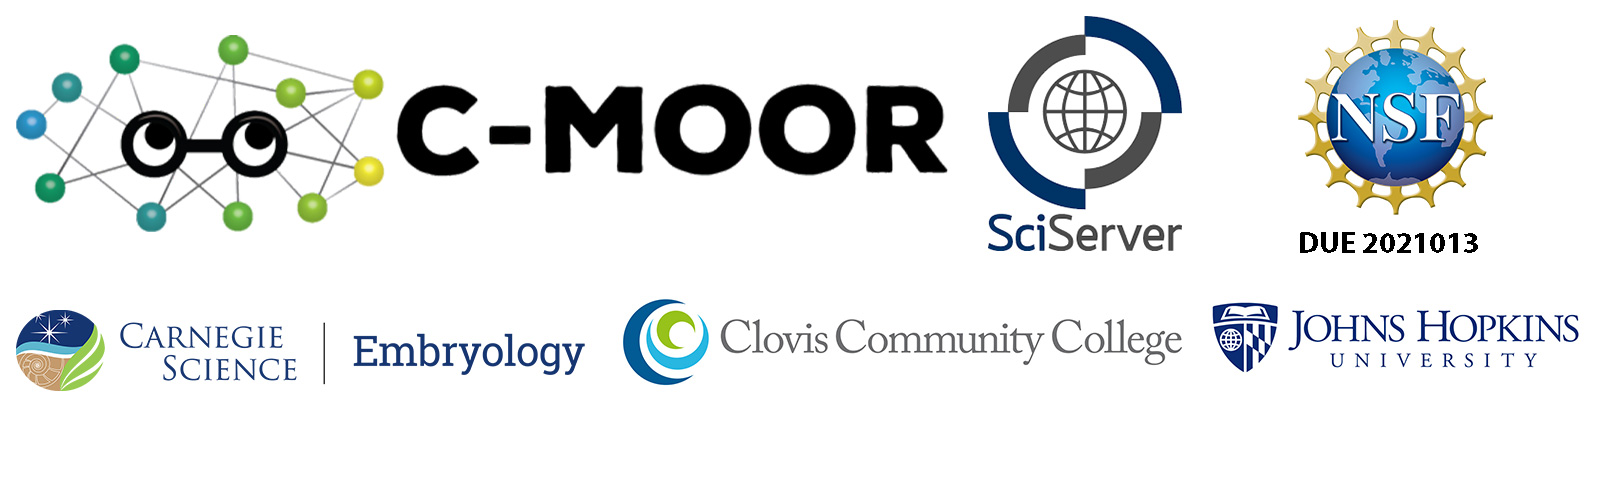 Logos represent the multiple institutions developing the material and supporting the free resources: C-MOOR, SciServer, National Science Foundation (NSF), Carnegie Science | Embryology, Clovis Community College, and Johns Hopkins University.